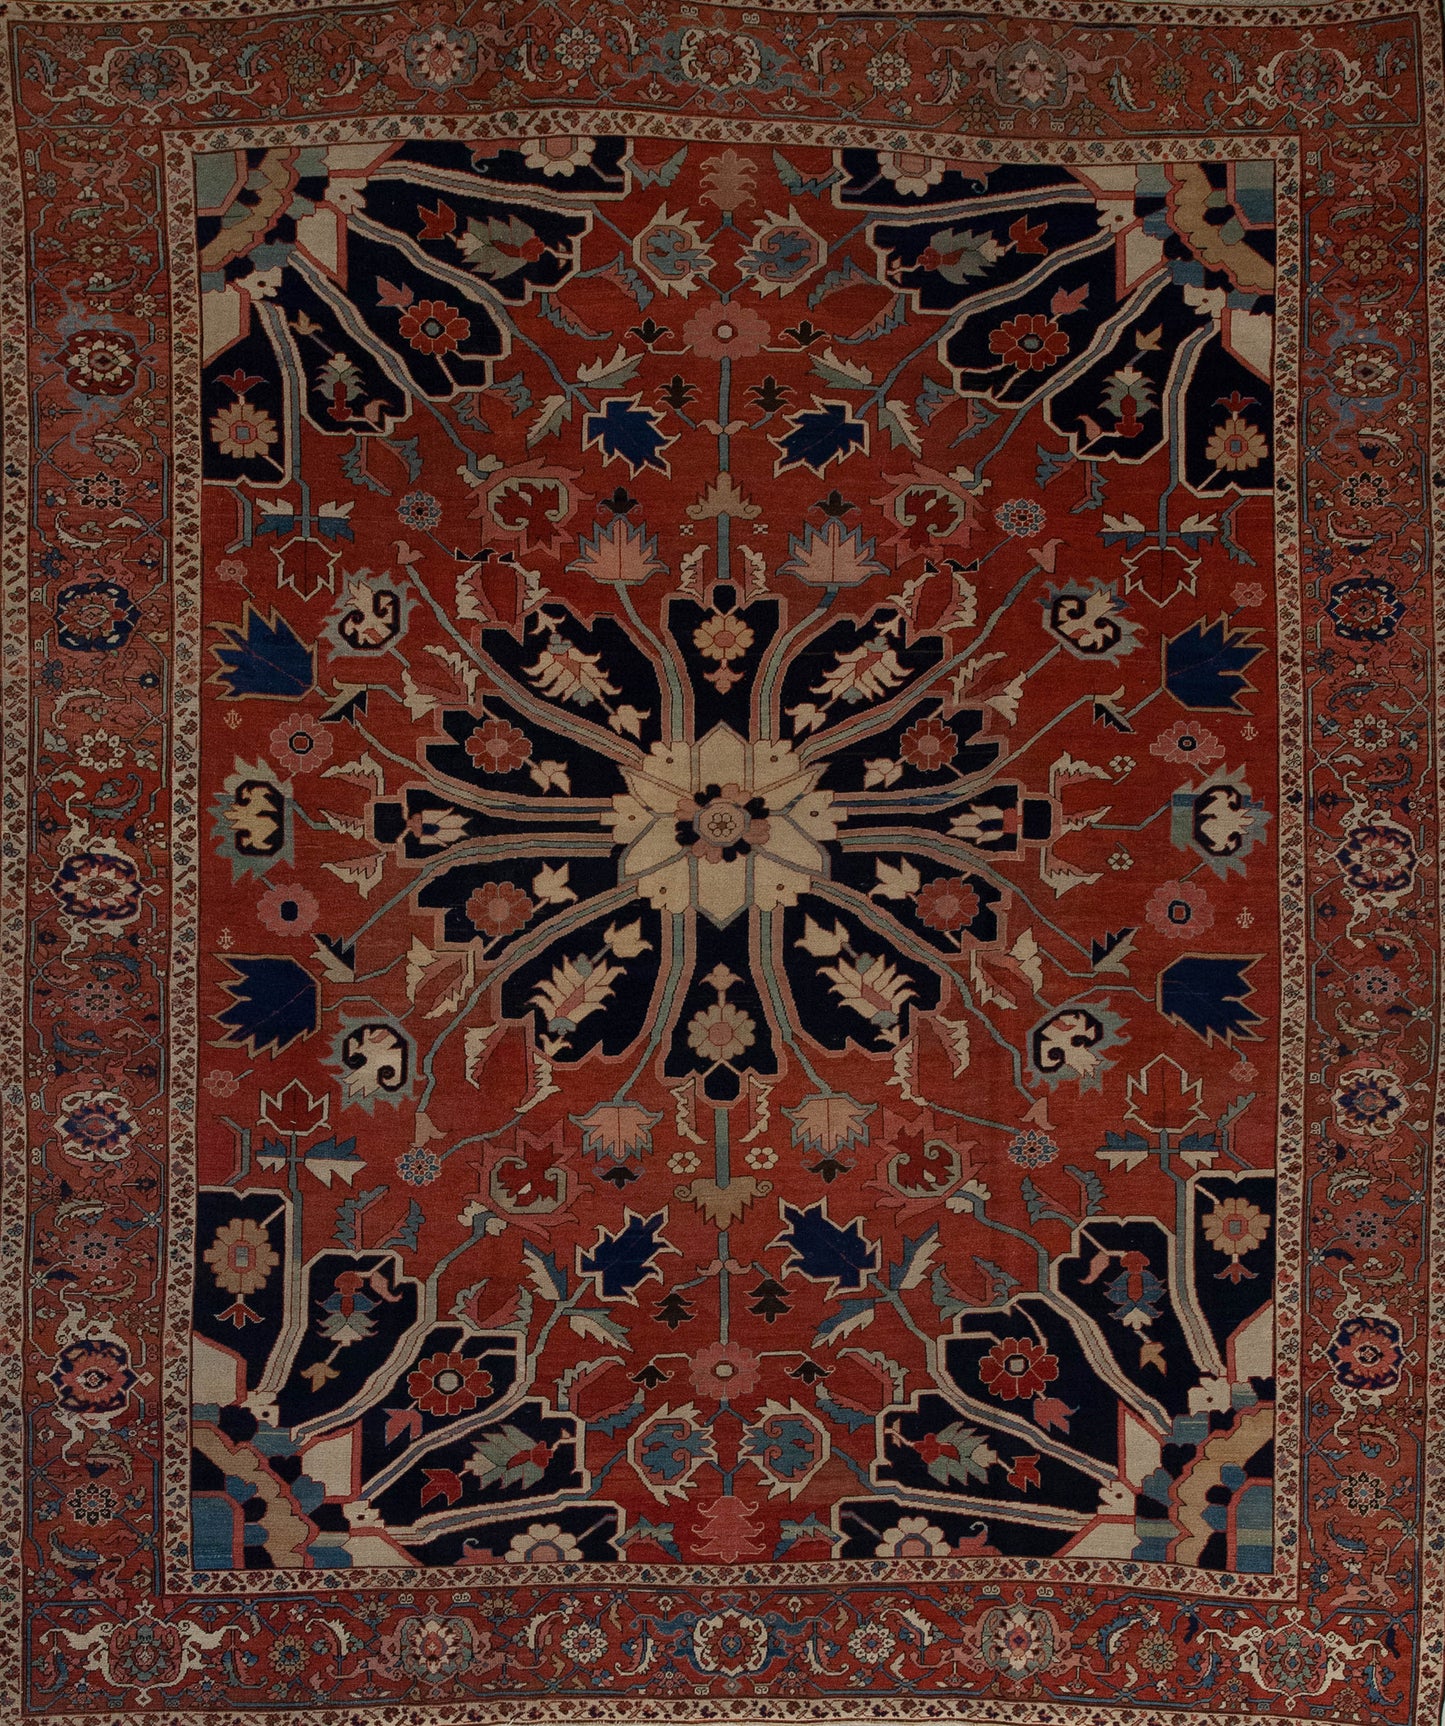 This ancient carpet comes with an adventurous orange vibe as the background. The color palette has black for the large petals of the largest flowers, and highlights of beige, blue, red, and brown. 